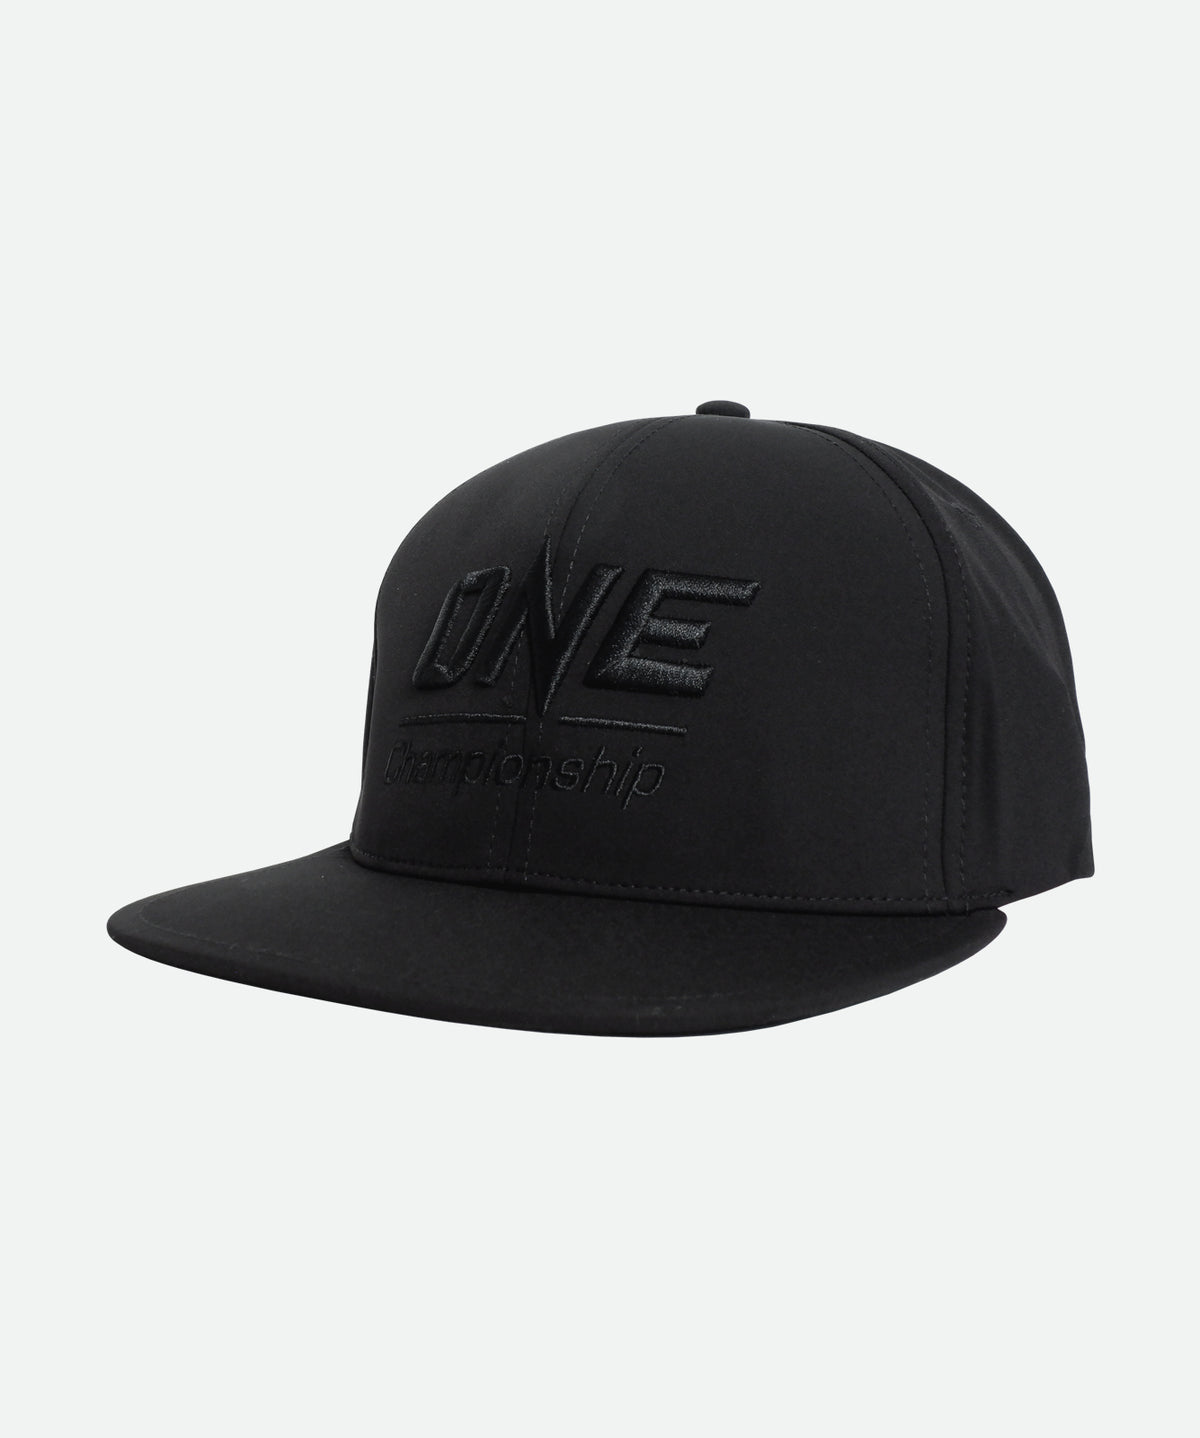 ONE Championship Logo Snapback Cap - ONE.SHOP | The Official Online Shop of ONE Championship